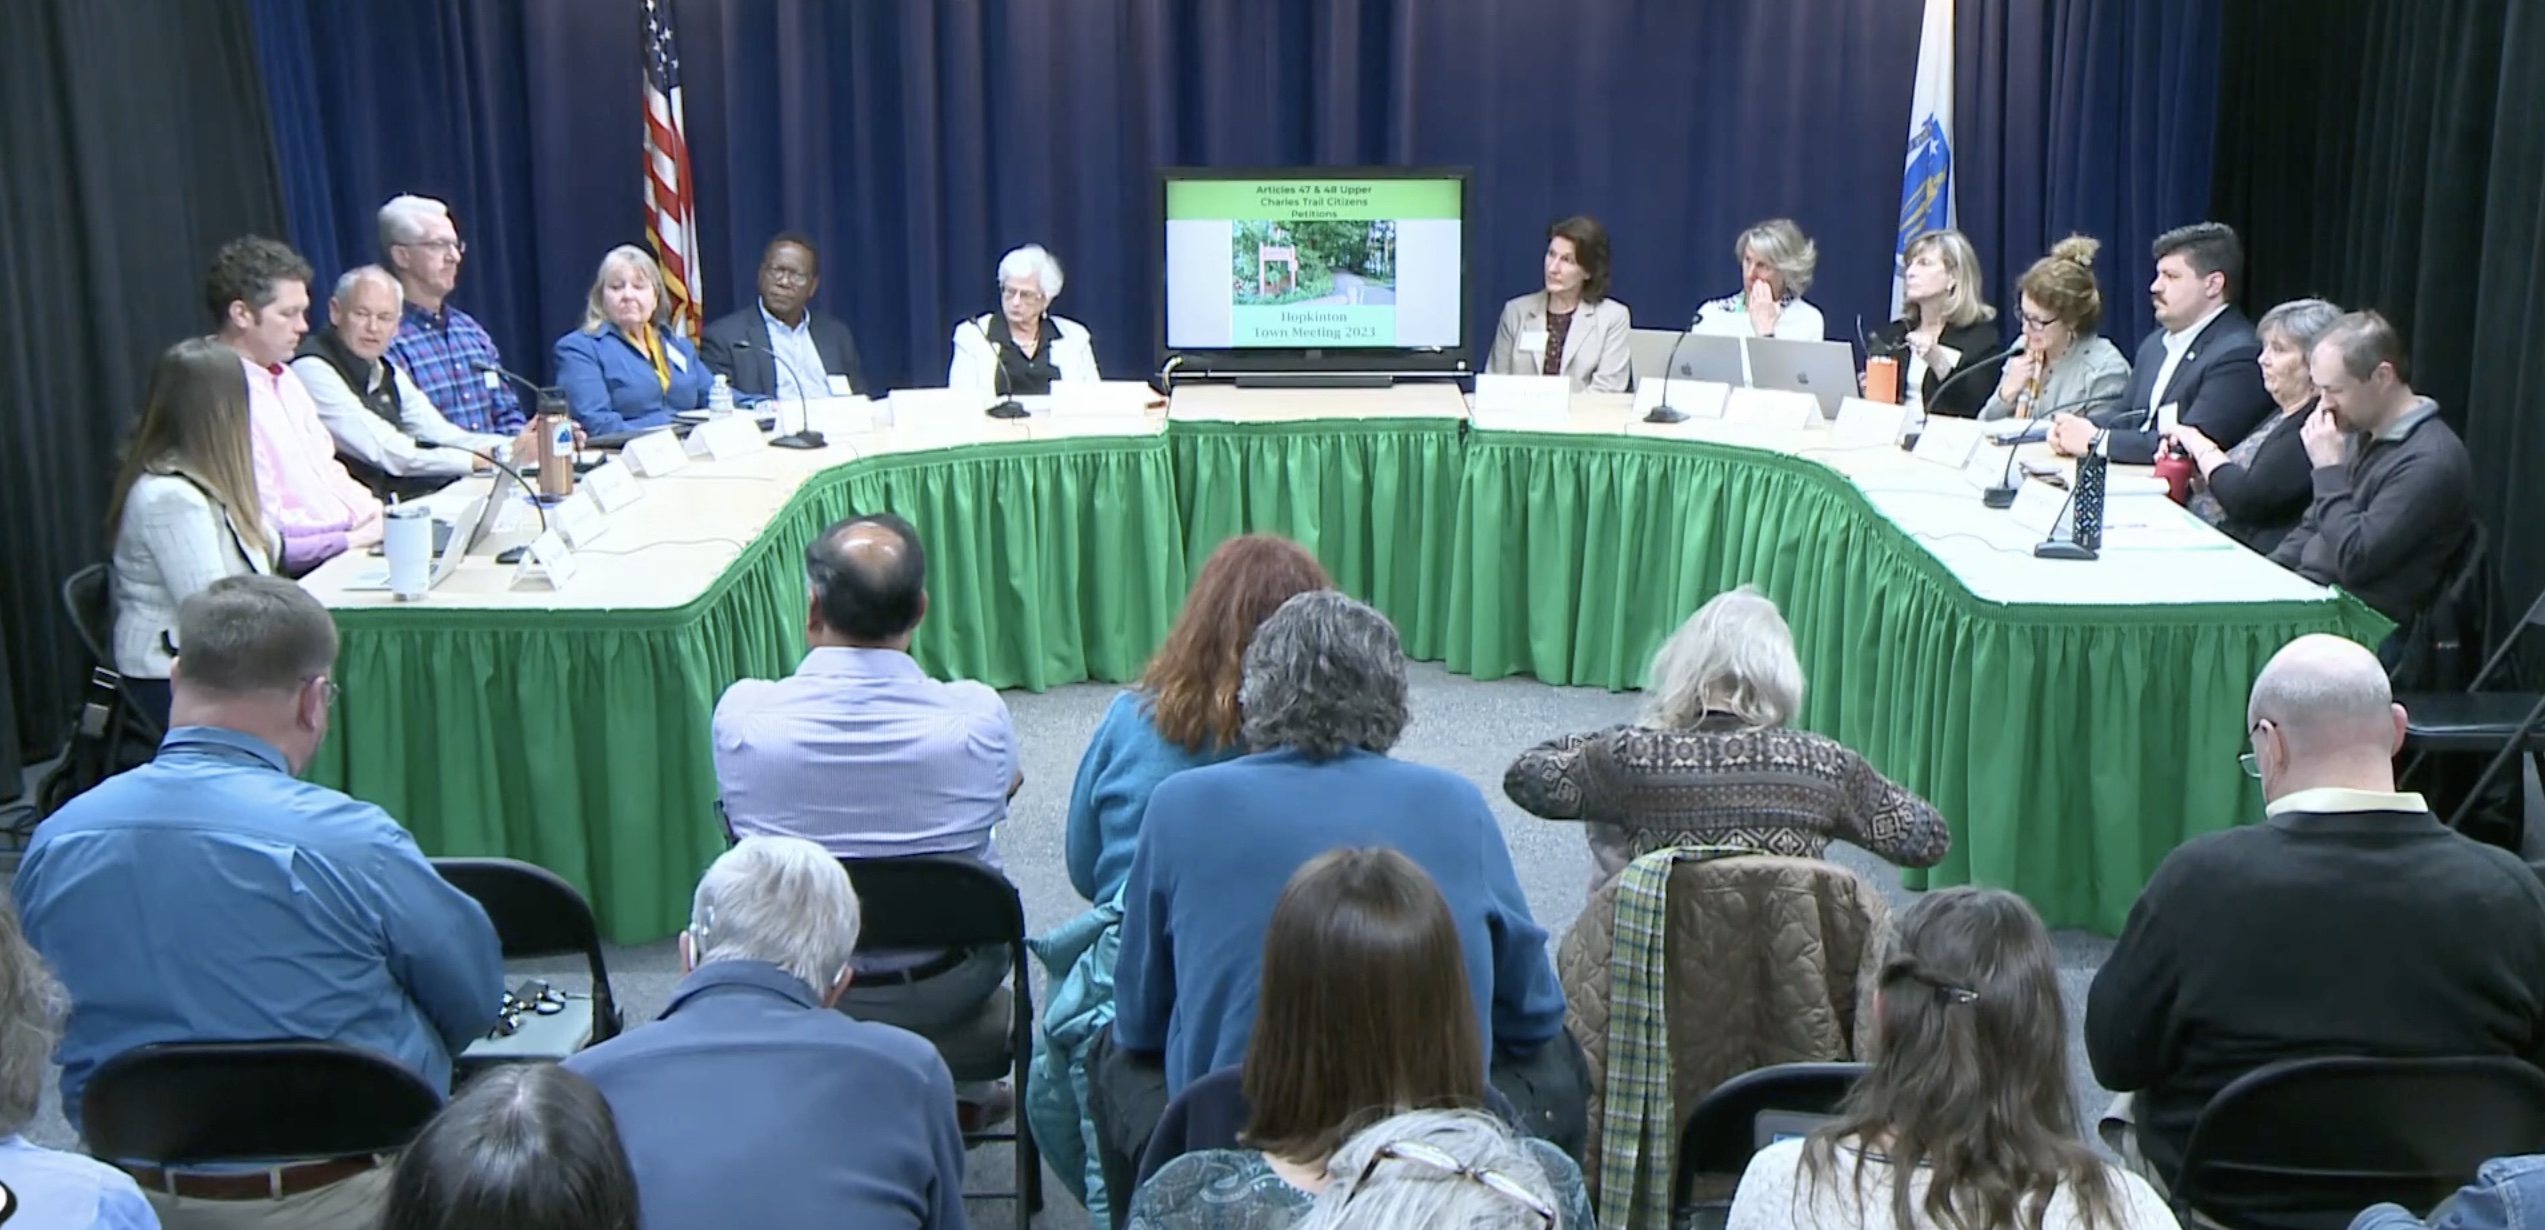 eHop’s Know Your Vote forum explains issues ahead of Town Meeting